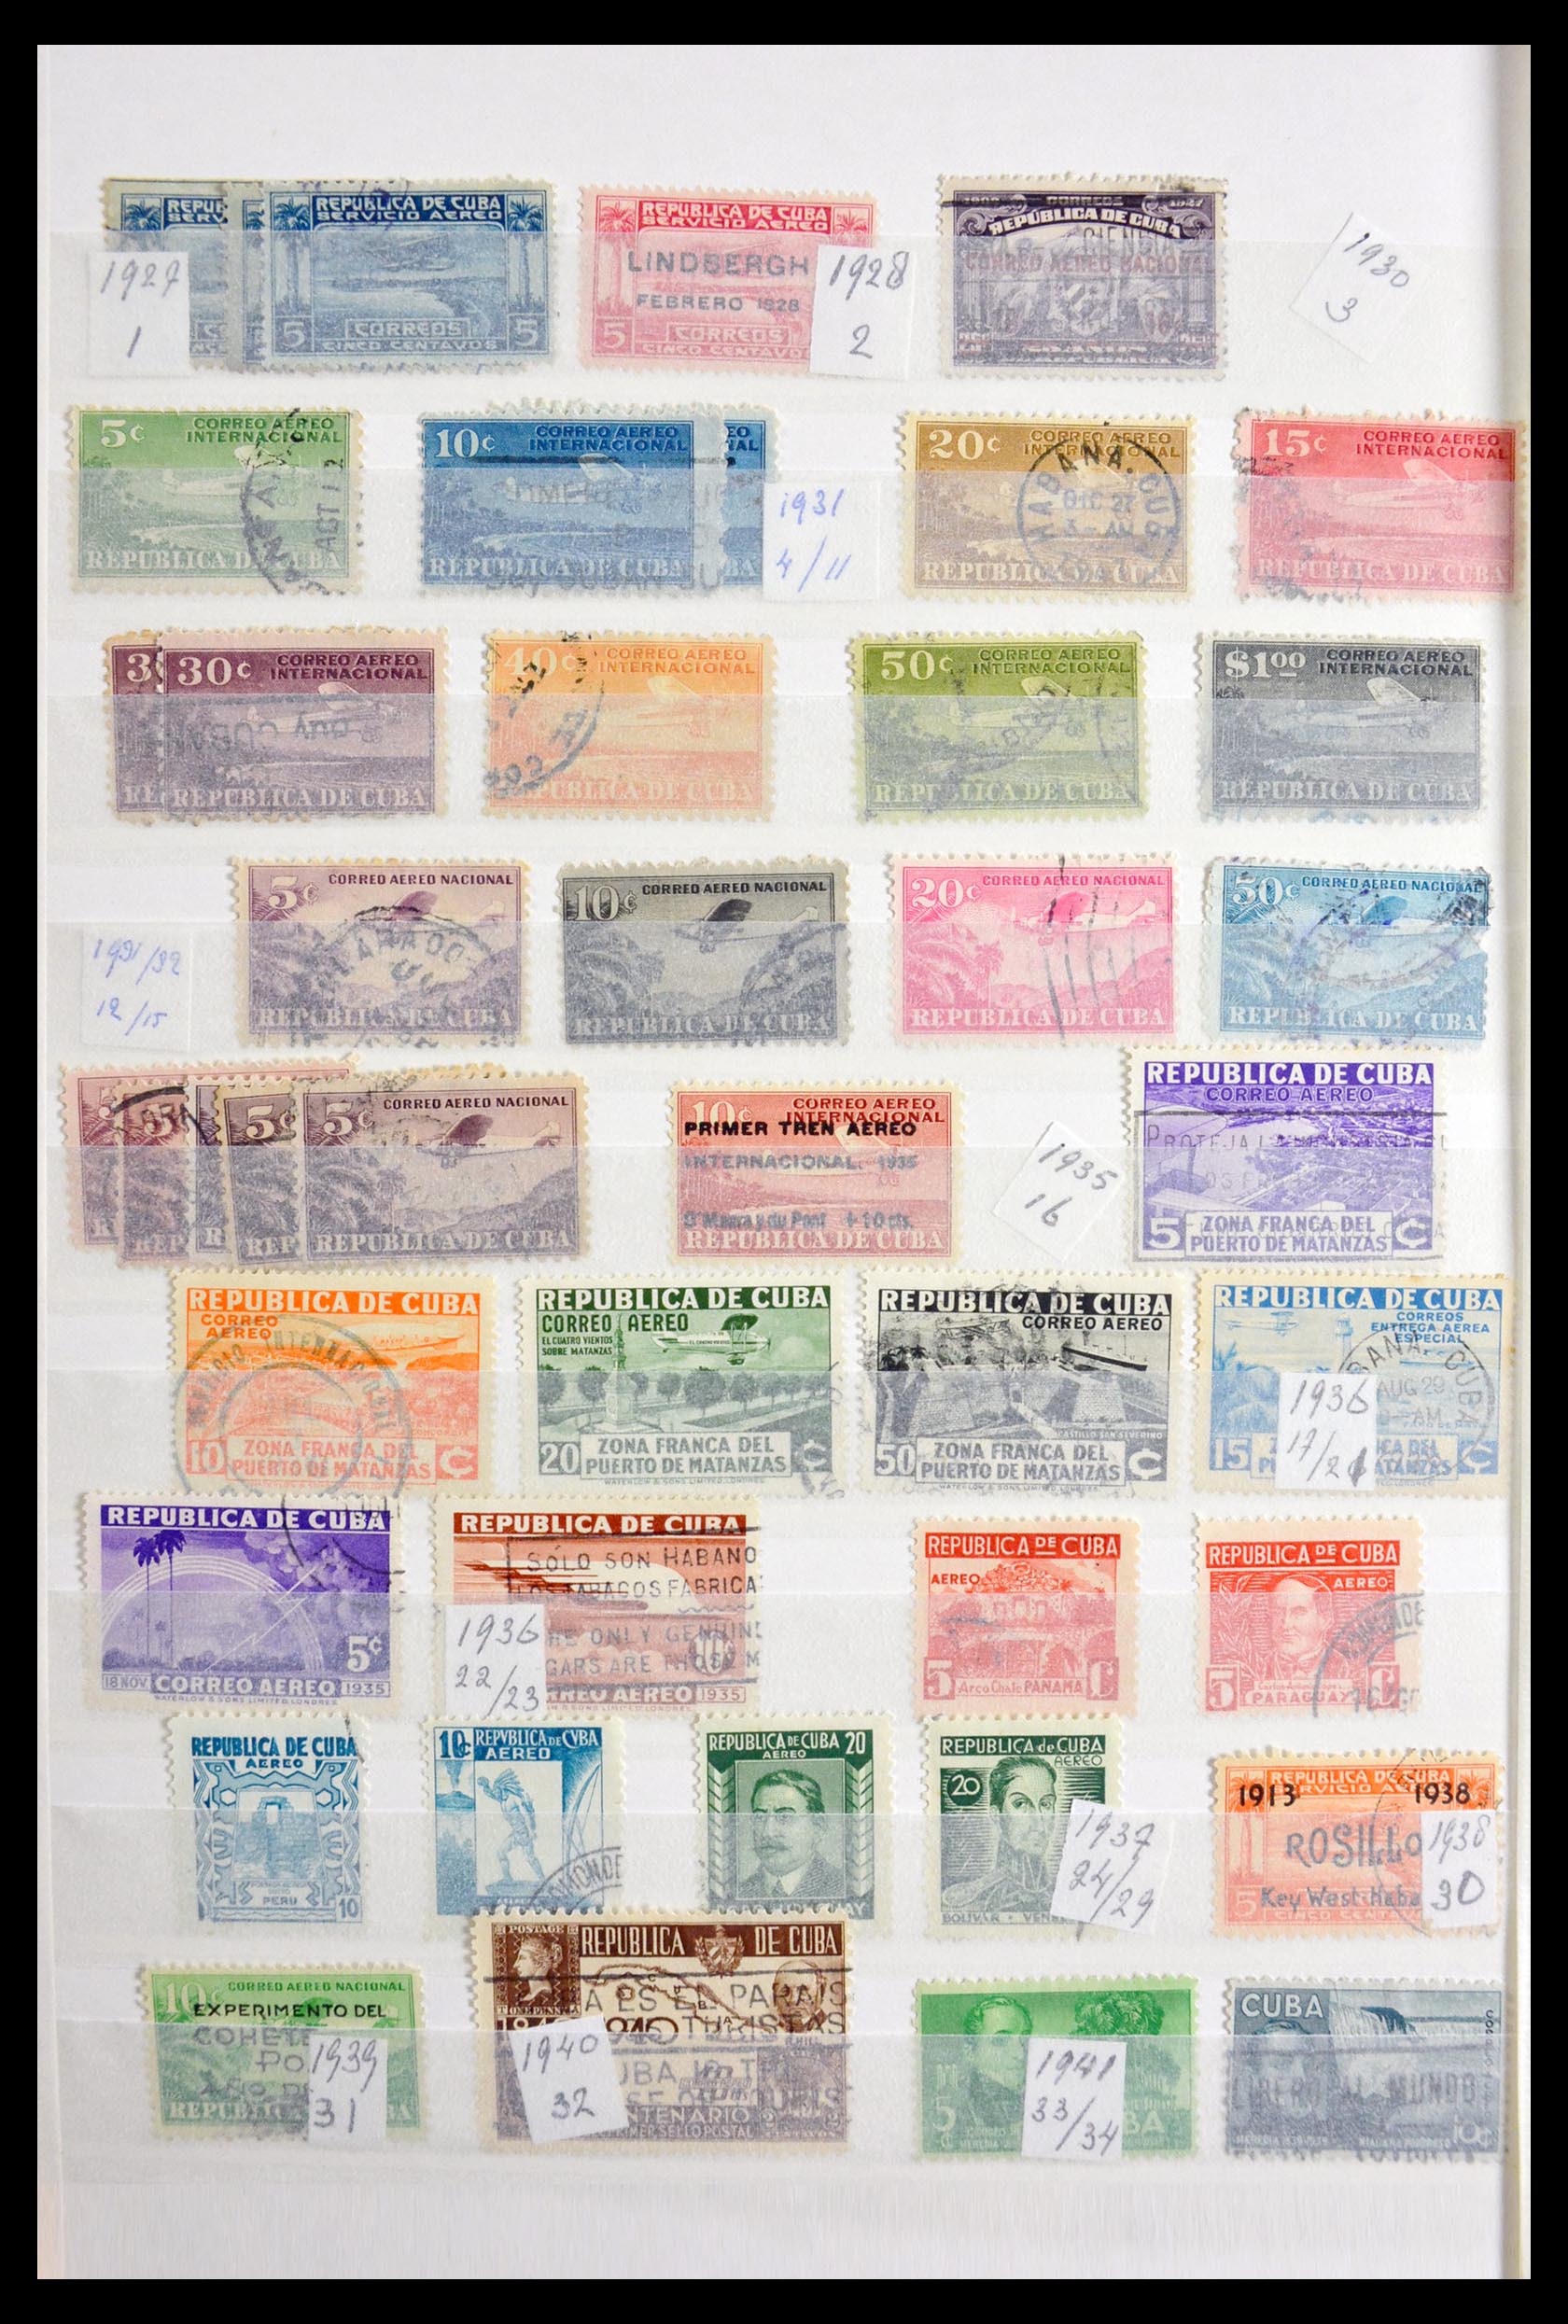 29917 044 - 29917 Latin America airmail stamps.